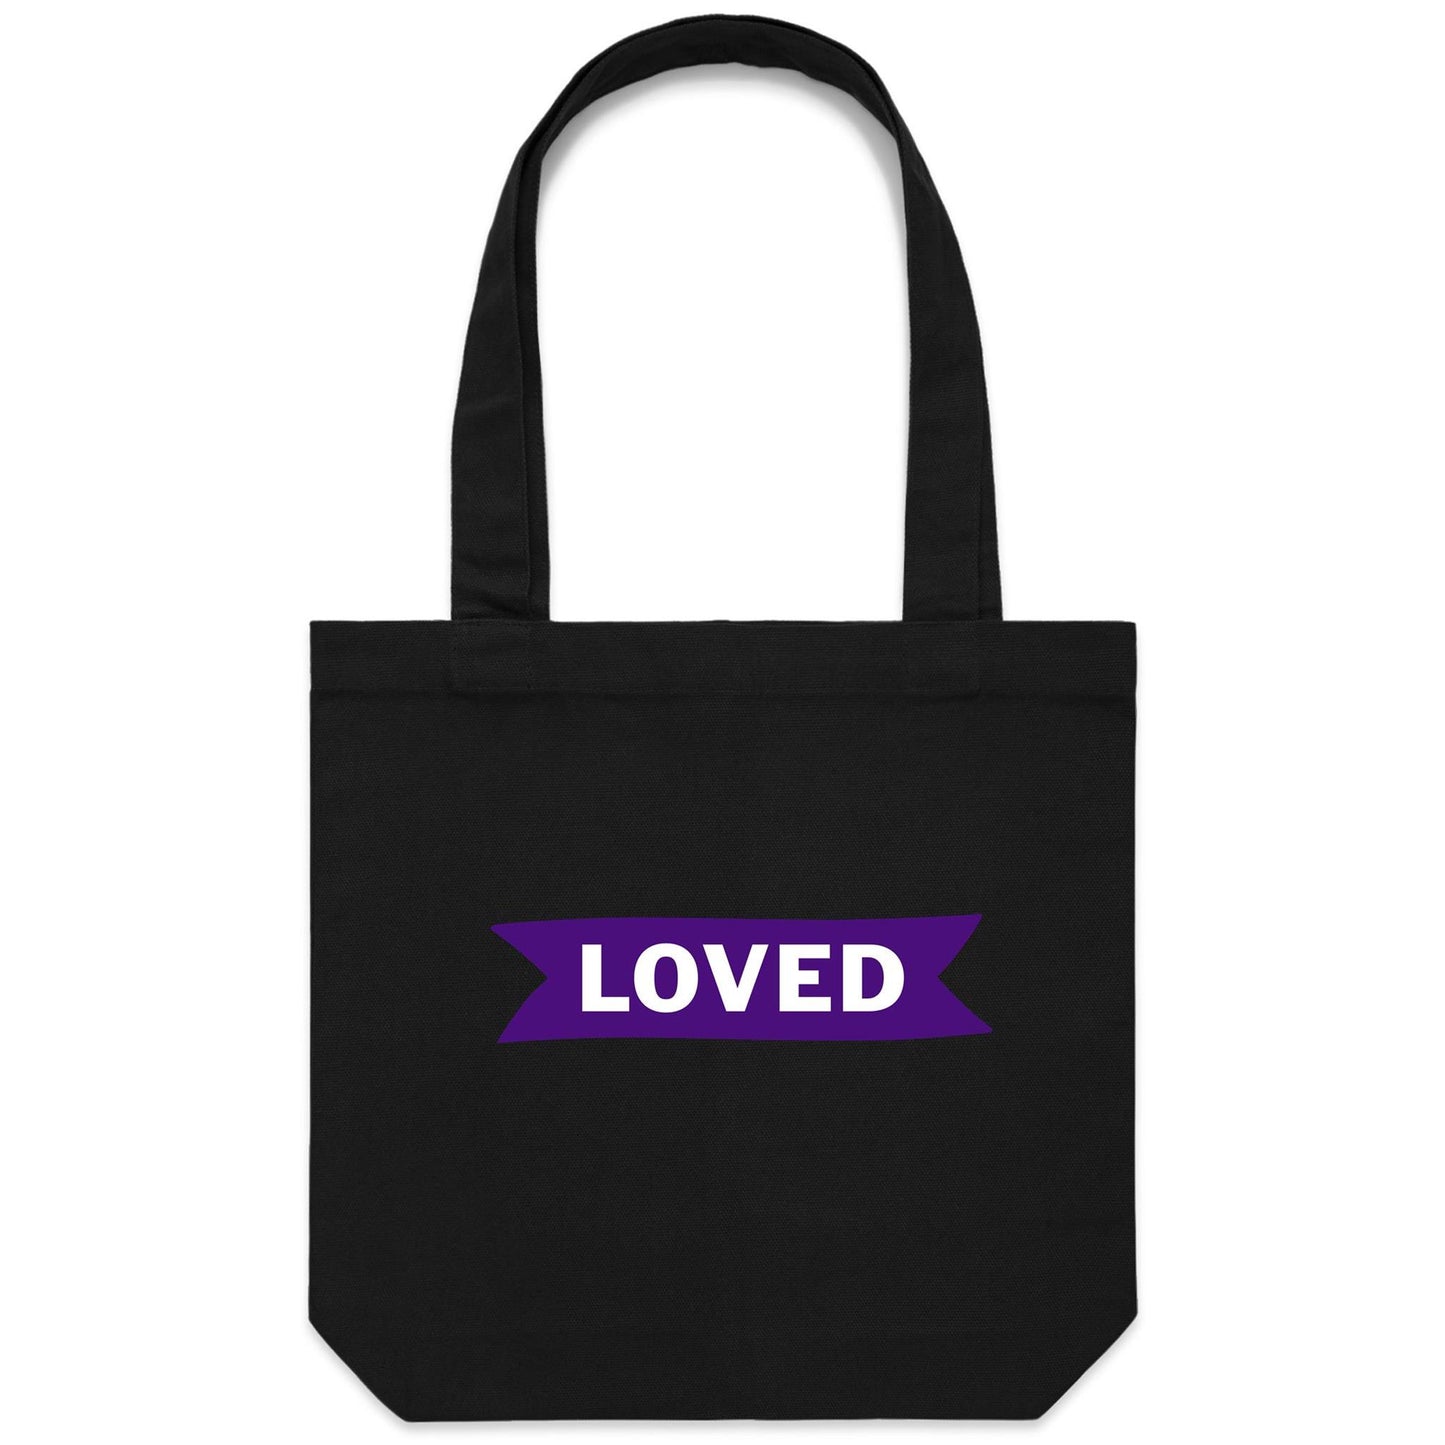 Loved Canvas Totes